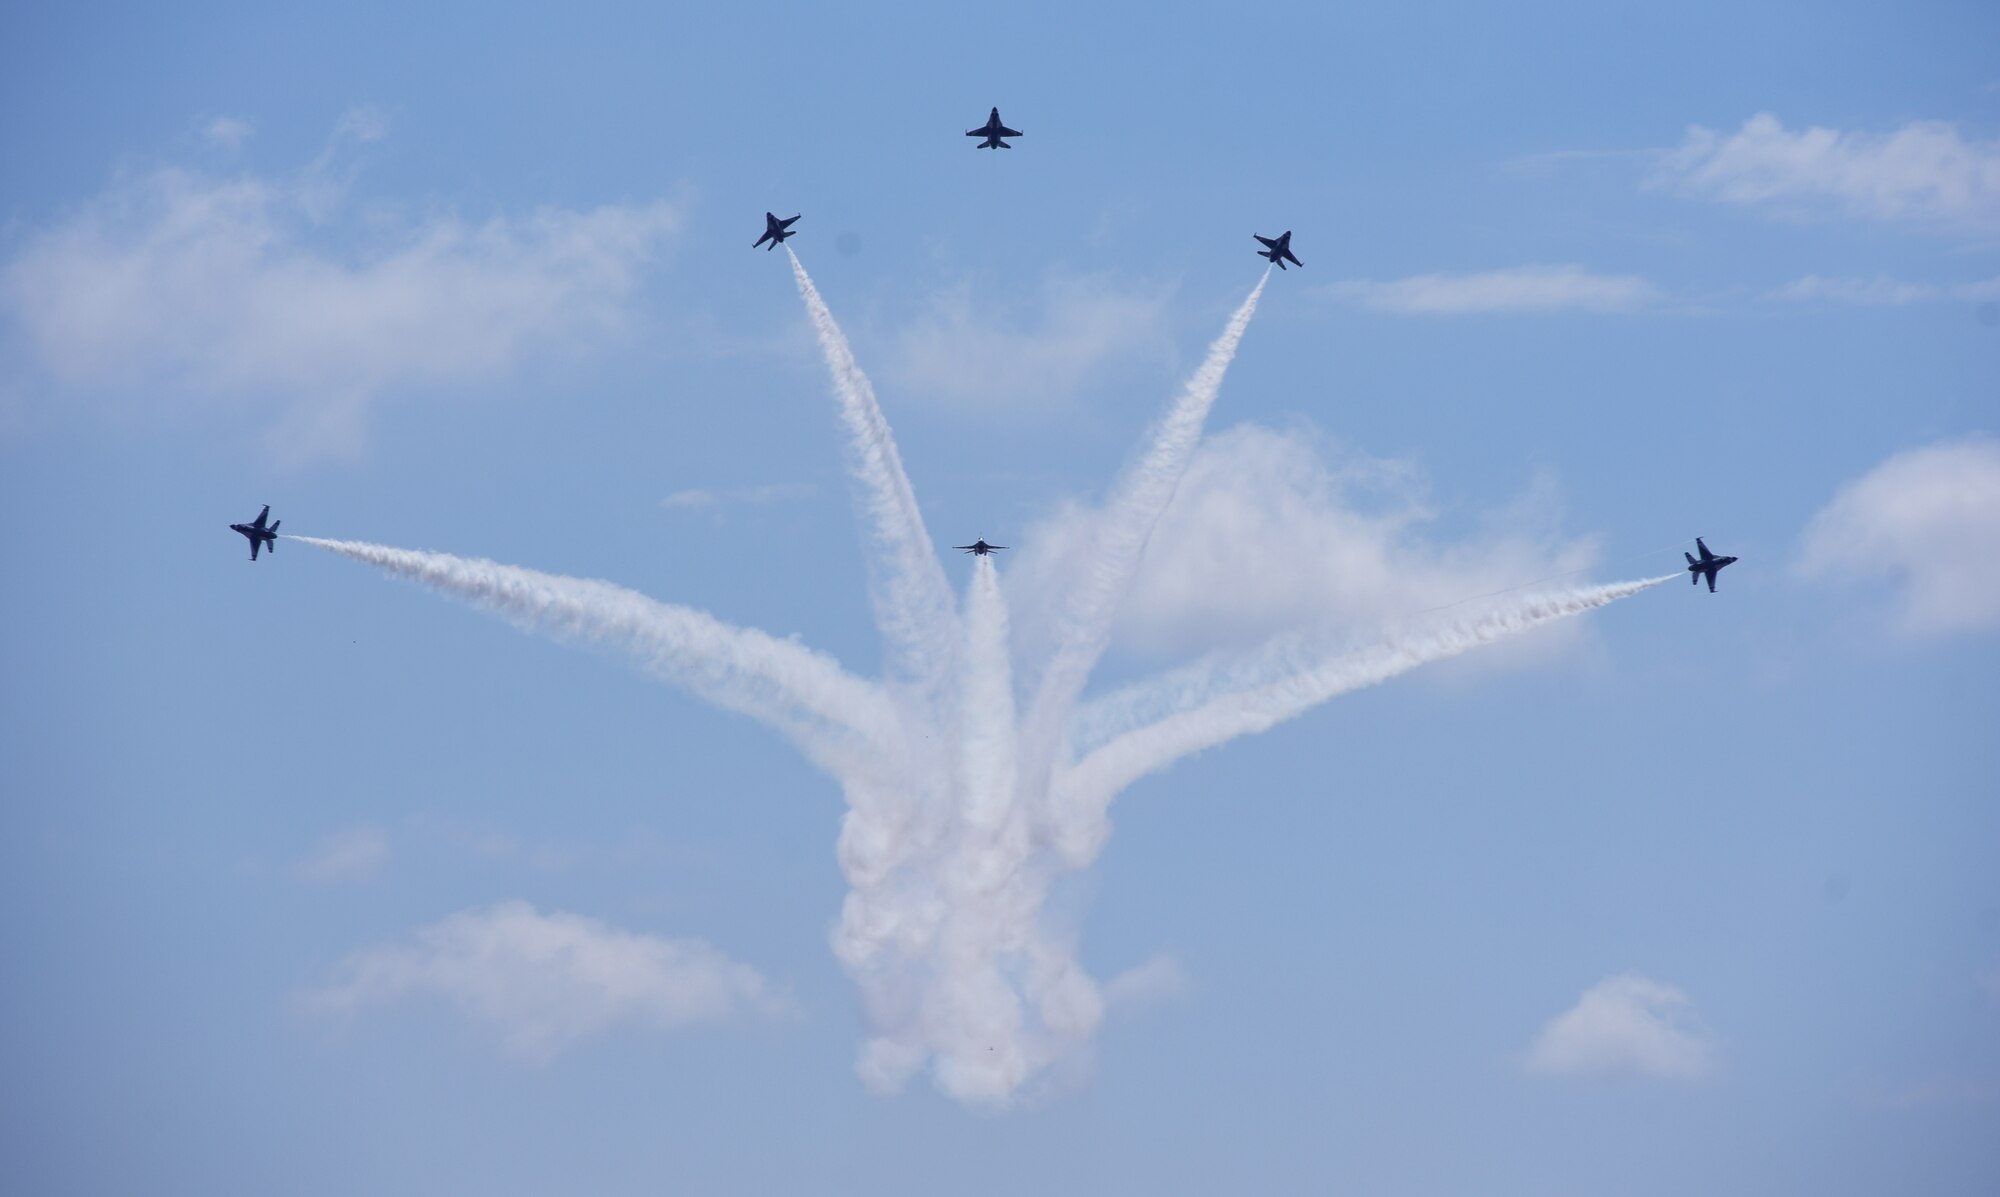 U.S. Air Force Thunderbirds perform a delta burst maneuver during Cheyenne Frontier Days, July 25, 2018, in Cheyenne, Wyo. The Thunderbirds are an Air Combat Command unit composed of eight pilots, including six demonstration pilots, four support officers, three civilians and more than 130 enlisted personnel performing in 25 career fields. The airshow provides a chance for the local community and worldwide visitors of CFD to see the U.S. Air Force in action over the skies of Cheyenne. (U.S. Air Force photo by Senior Airman Breanna Carter)